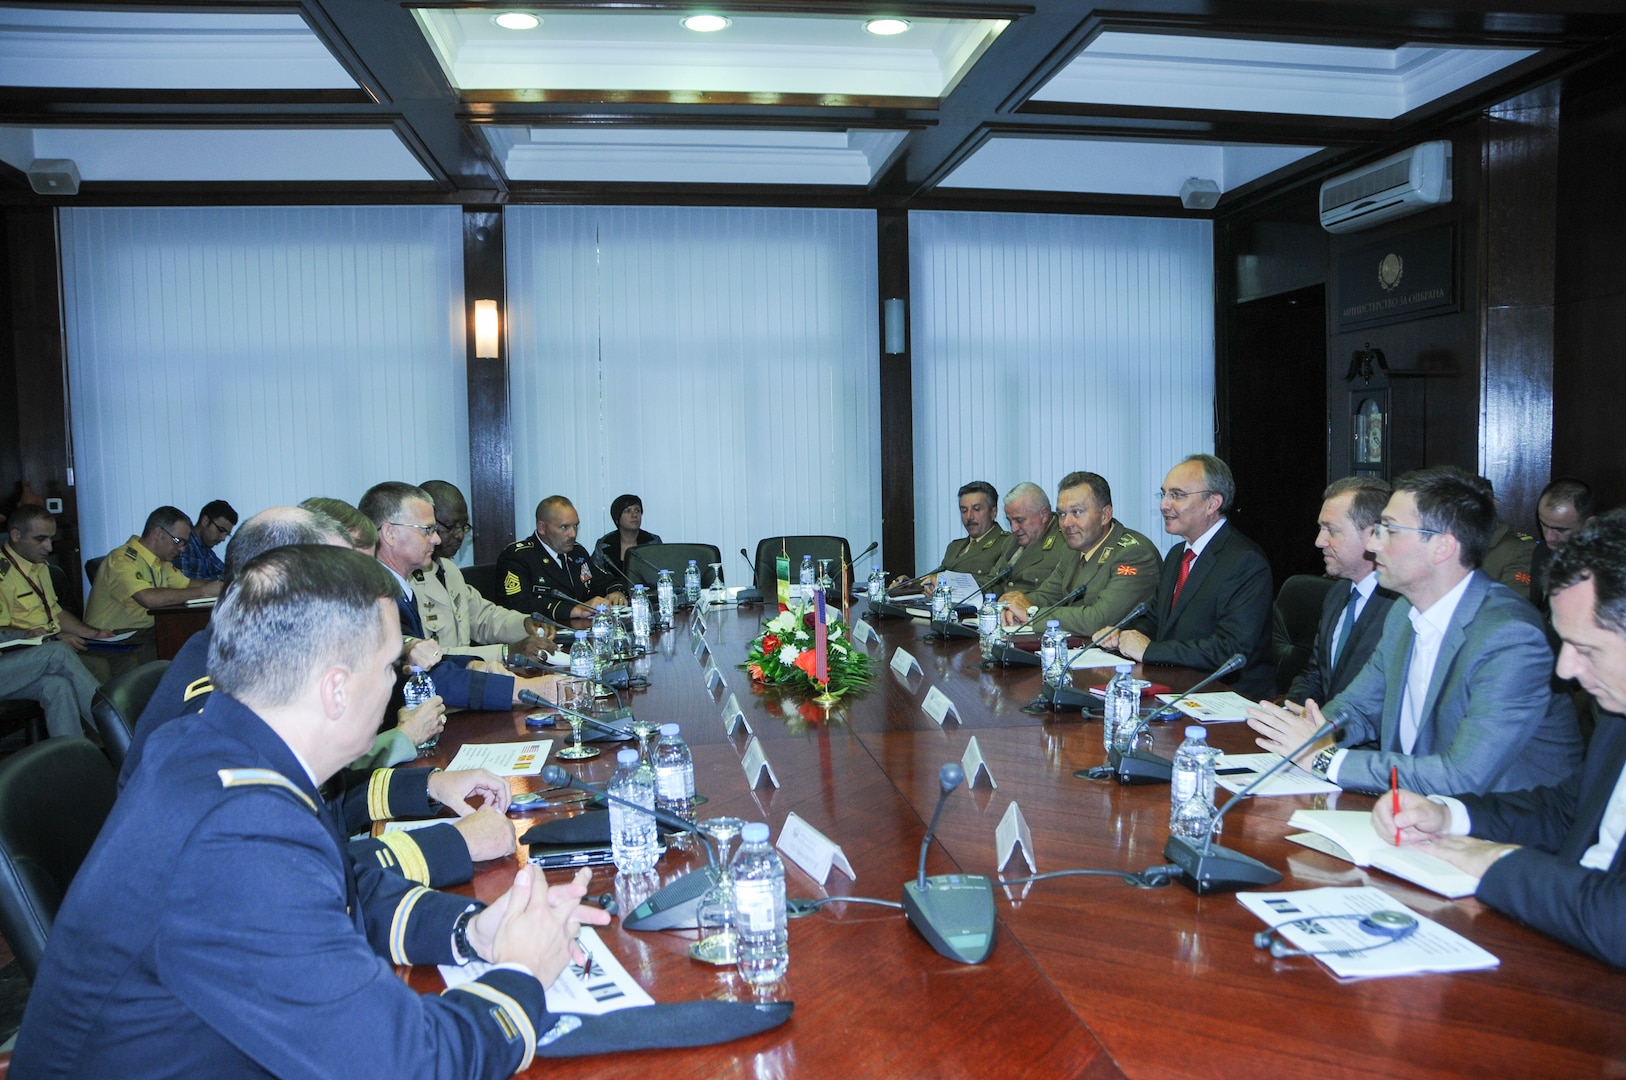 Maj. Gen. Steven Cray and the Vermont Delegation discuss the tri-lateral engagement with the Army of the Republic of Macedonia, the Minister of Defense and his delegation, and the delegation from Senegal, Sept. 24, 2014. According to Cray, the countries of Macedonia and Senegal have come a long way to moving the engagement forward. (U.S. Air National Guard photo by Capt. Dyana Allen)